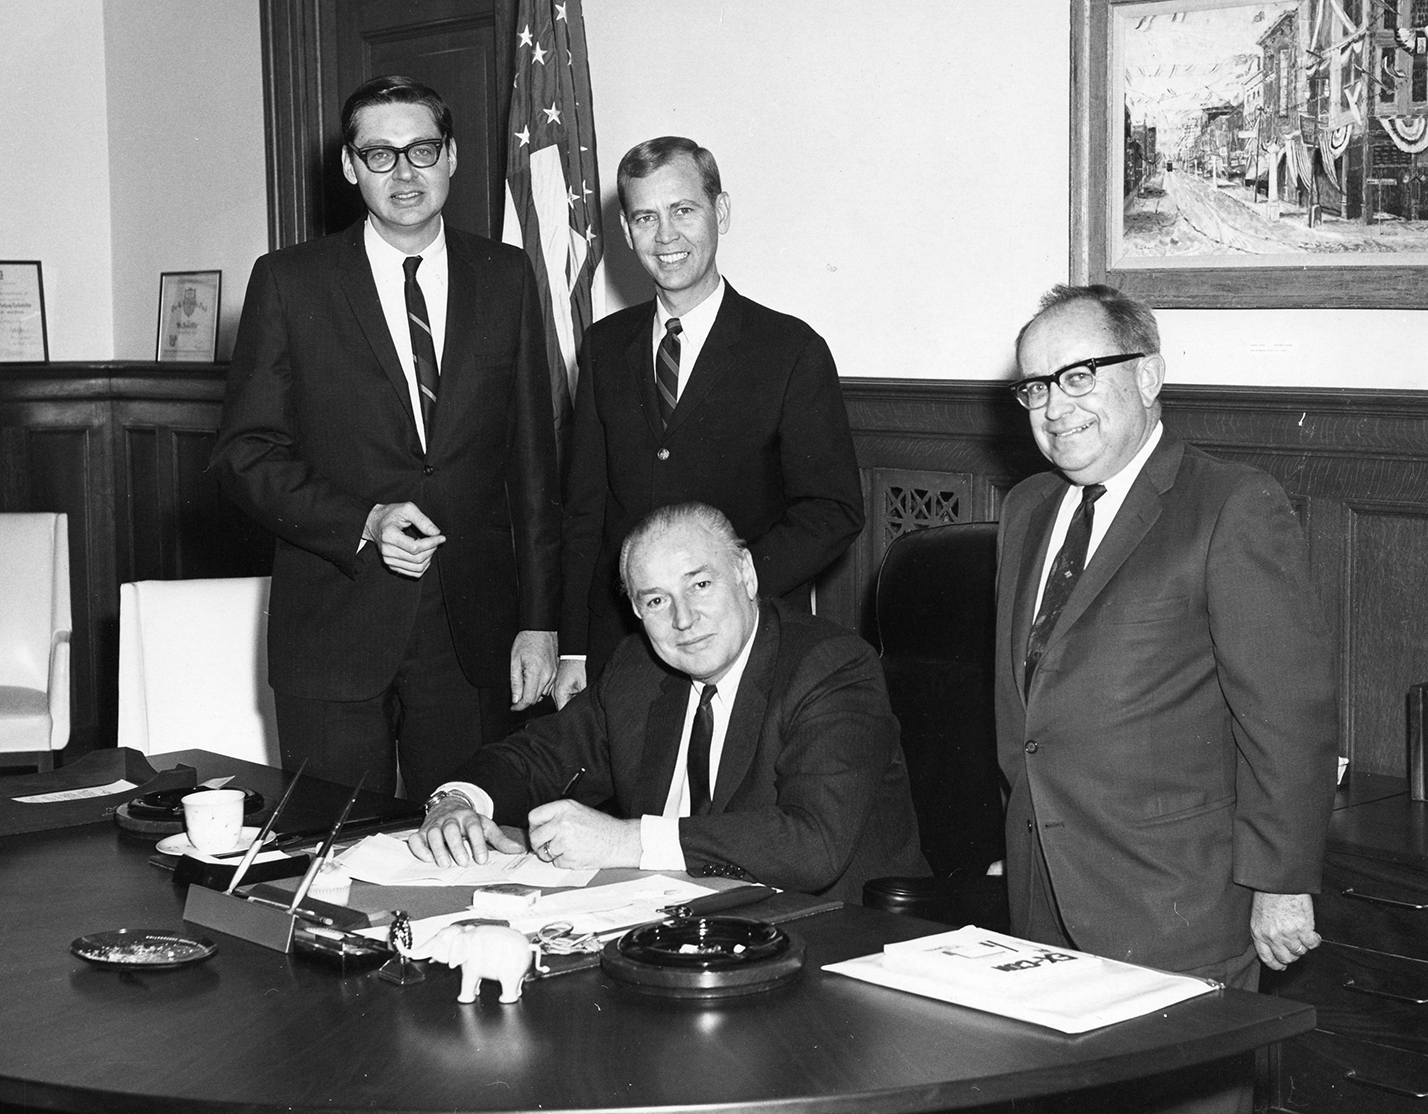 Cal Ledbetter, with Ben Allen, Oscar Alagood, standing next to Governor Winthrop Rockefeller, seated, in governor's office. ca. 1968